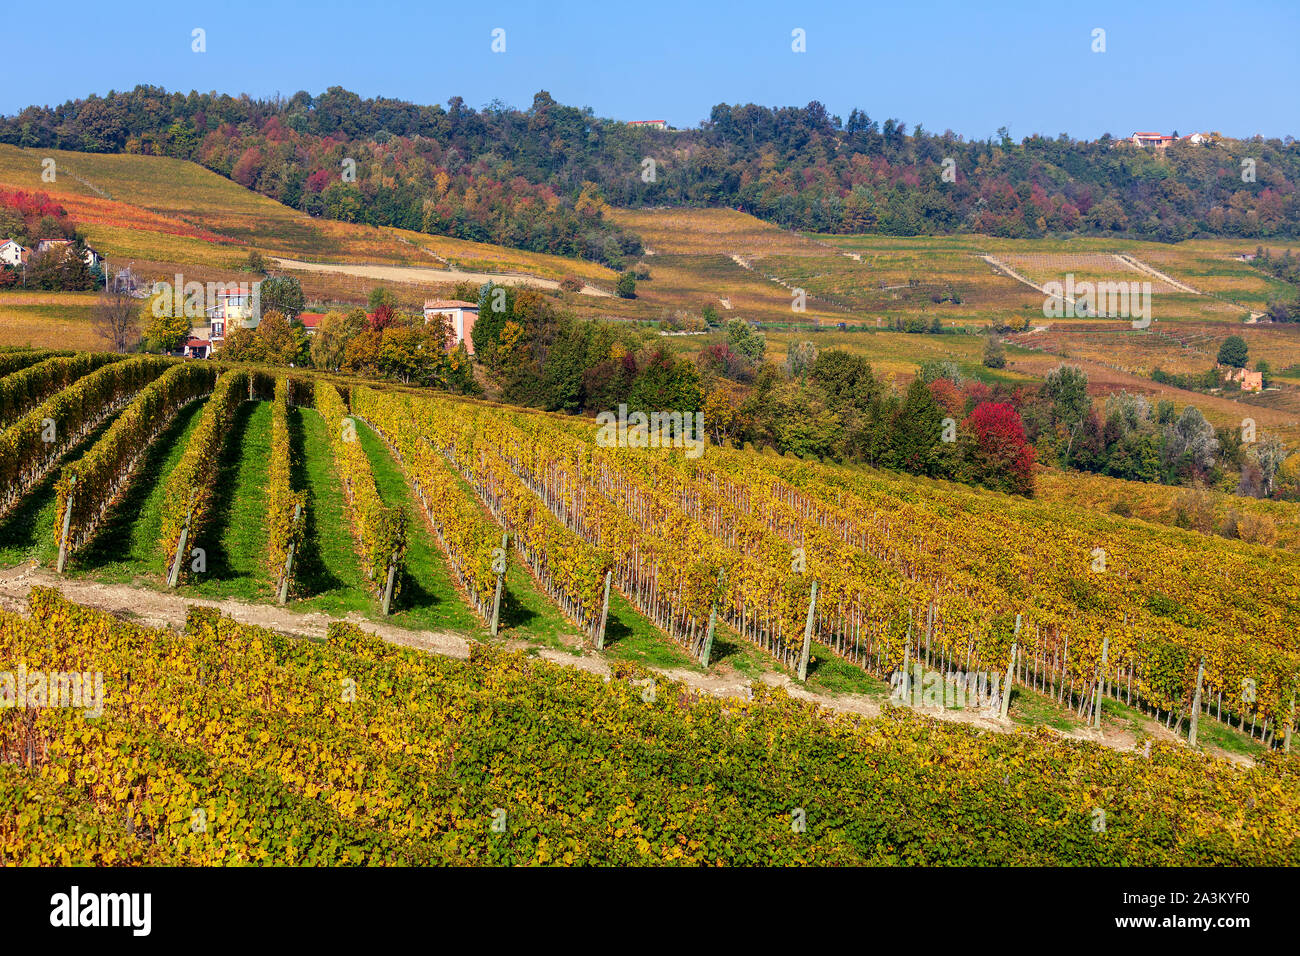 View of colorful autumnal vineyards on the hills of Barolo in Langhe, Piedmont, Northern Italy. Stock Photo